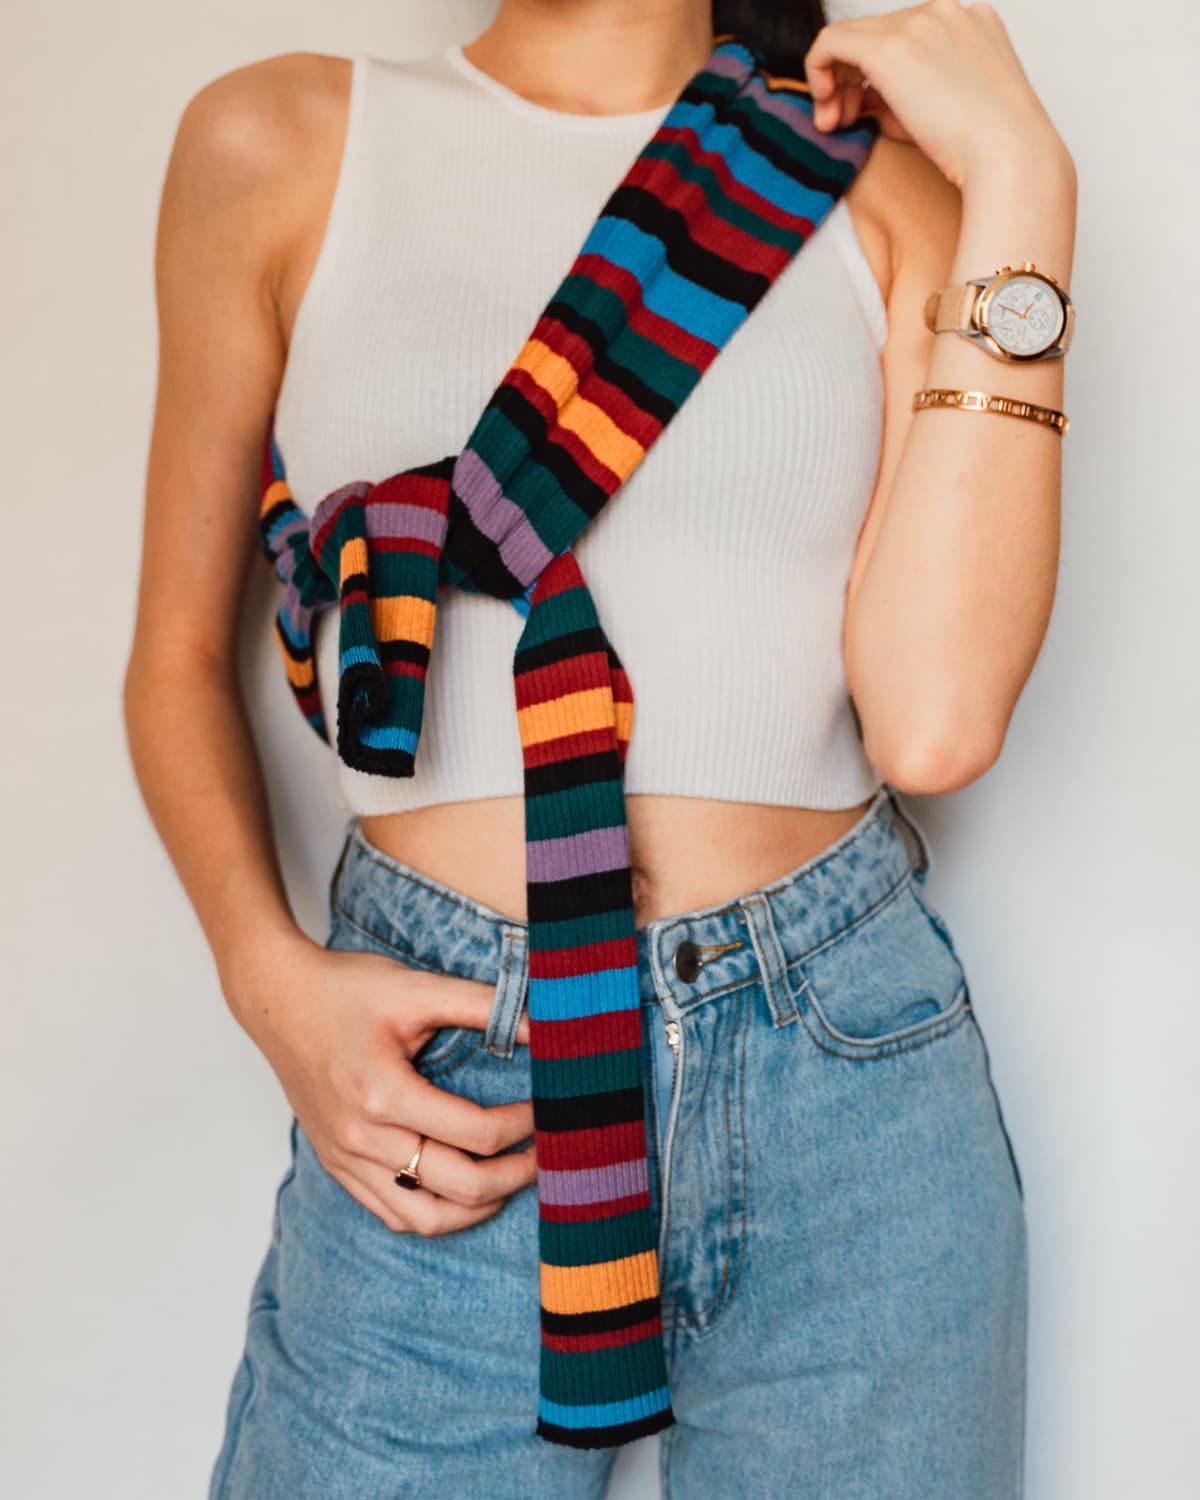 A slim woman wearing jeans shirt and a colorful scarf with stripes